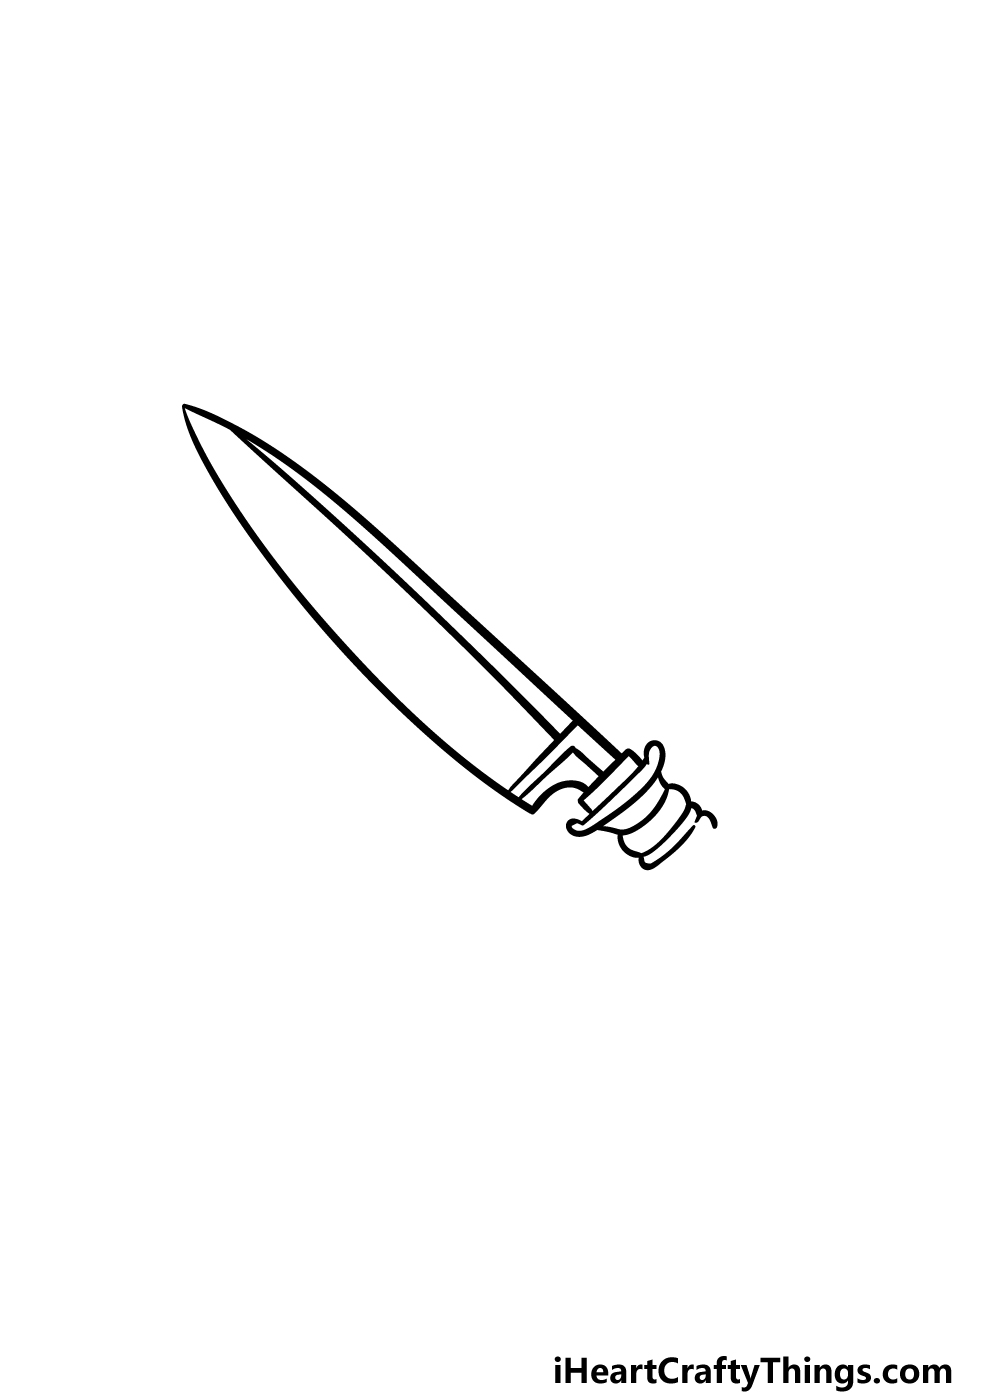 drawing a knife step 3